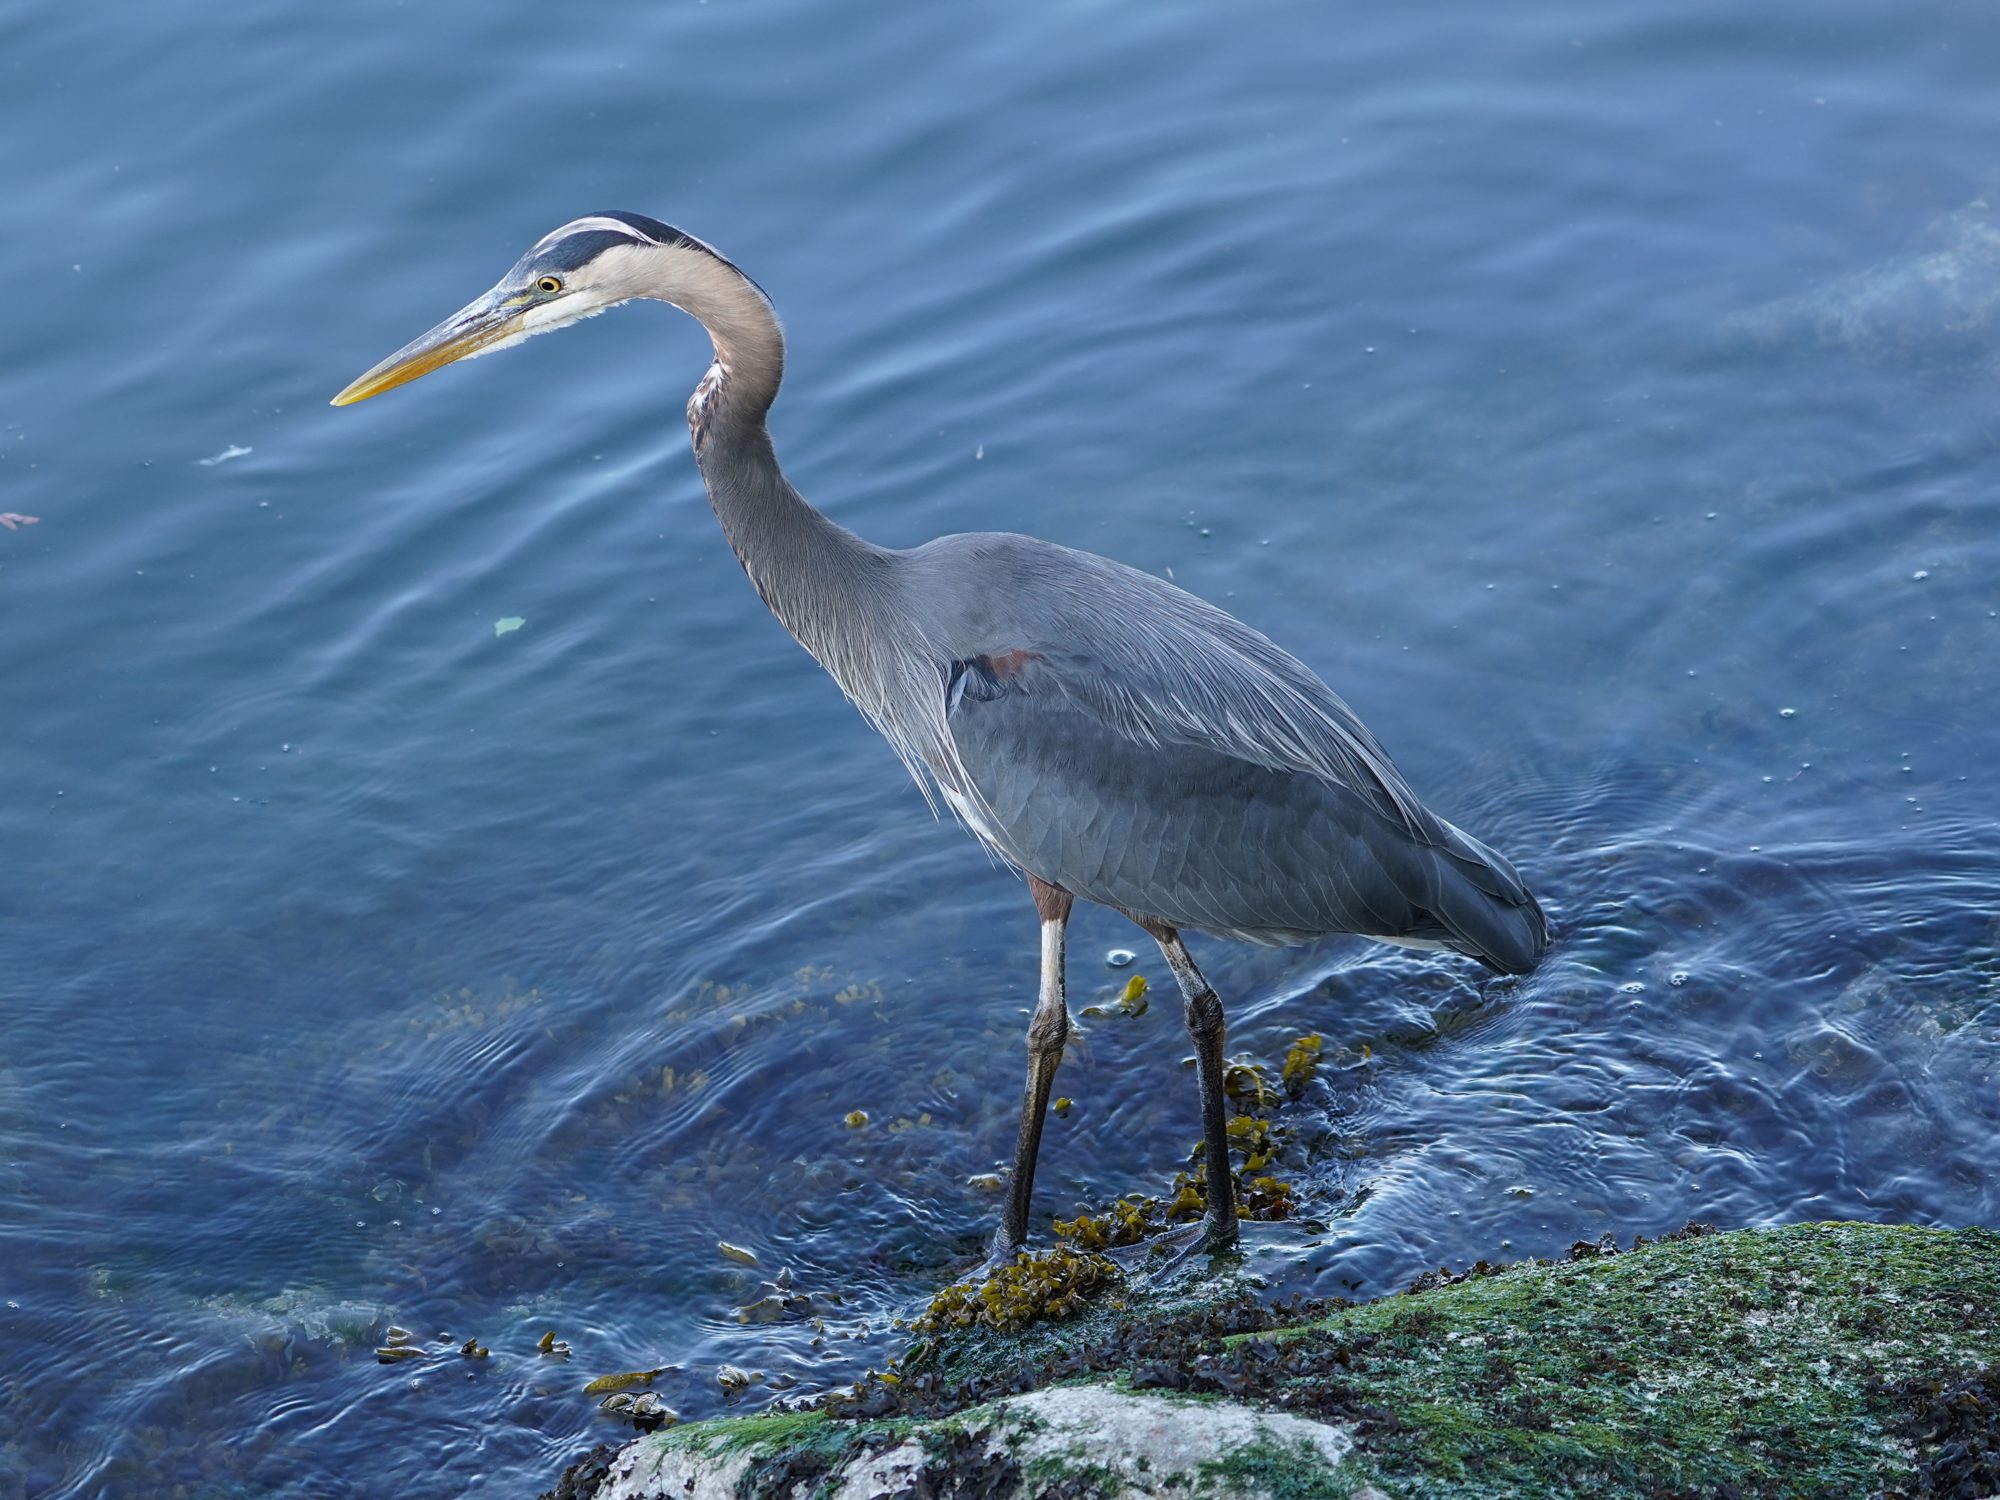 A Great Blue Heron standing in shallow water